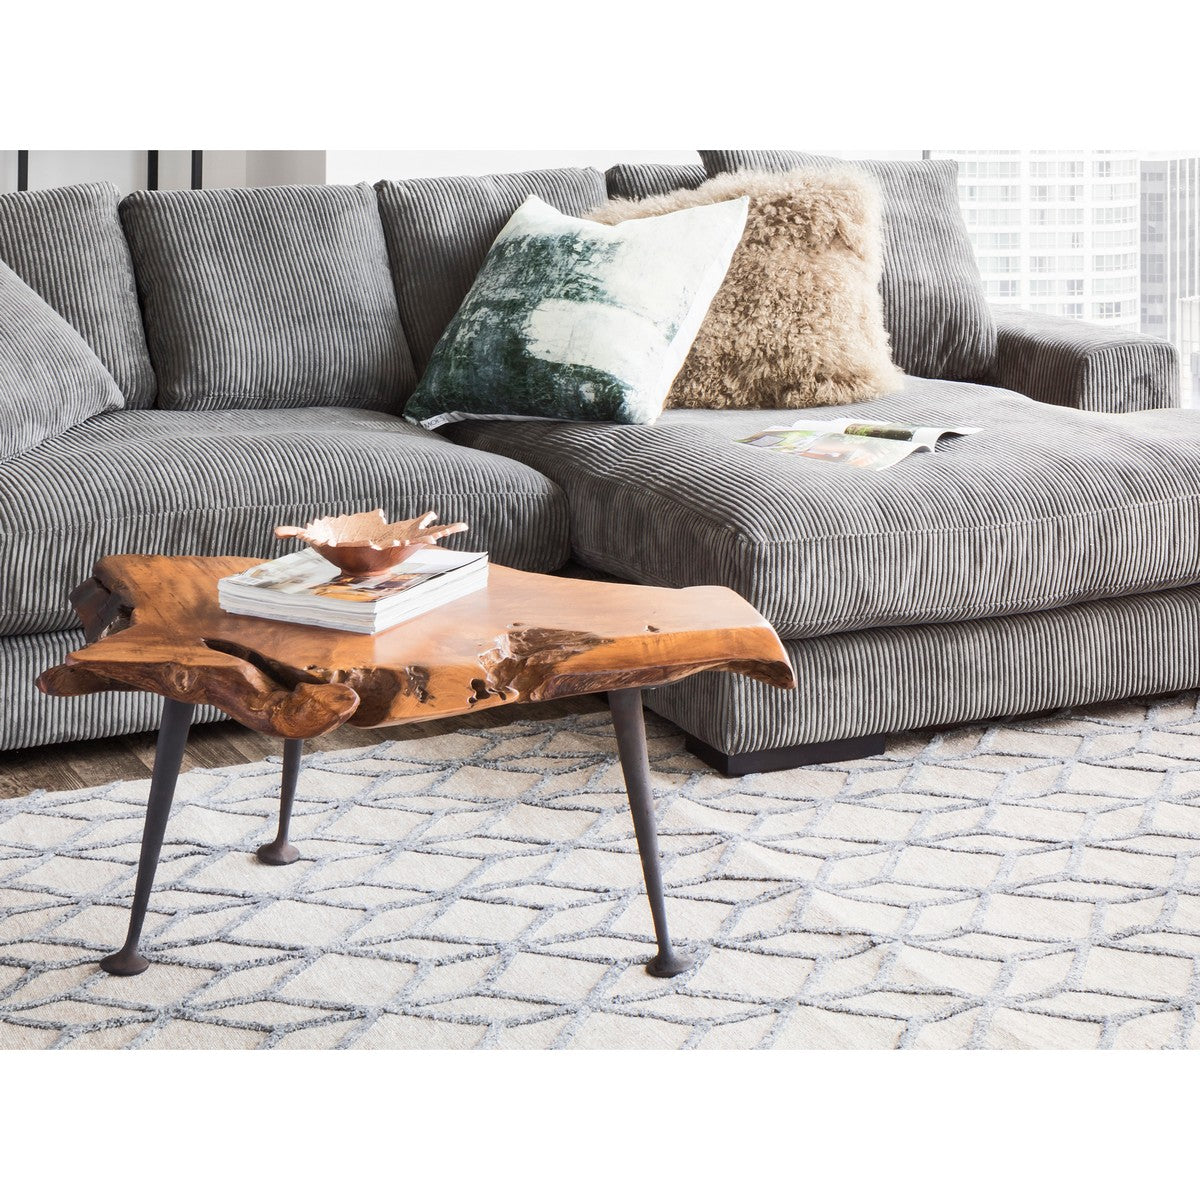 Moe's Home Collection Natural Teak Coffee Table With Cast Iron Legs - EI-1006-24 - Moe's Home Collection - Coffee Tables - Minimal And Modern - 1